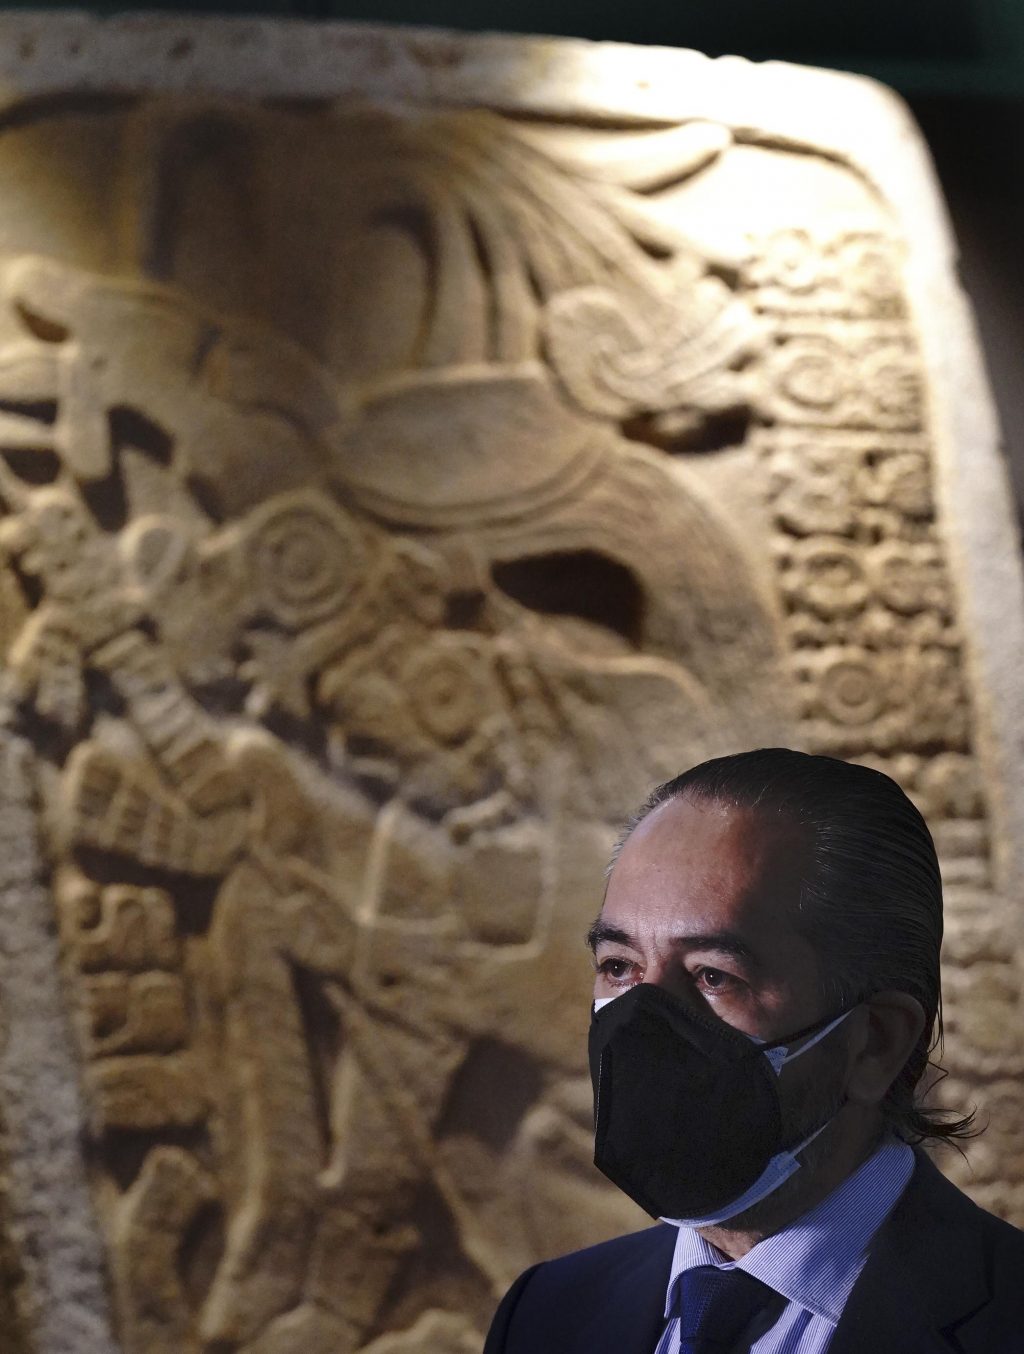 Mexico showcases pre-Hispanic artifacts recovered from abroad